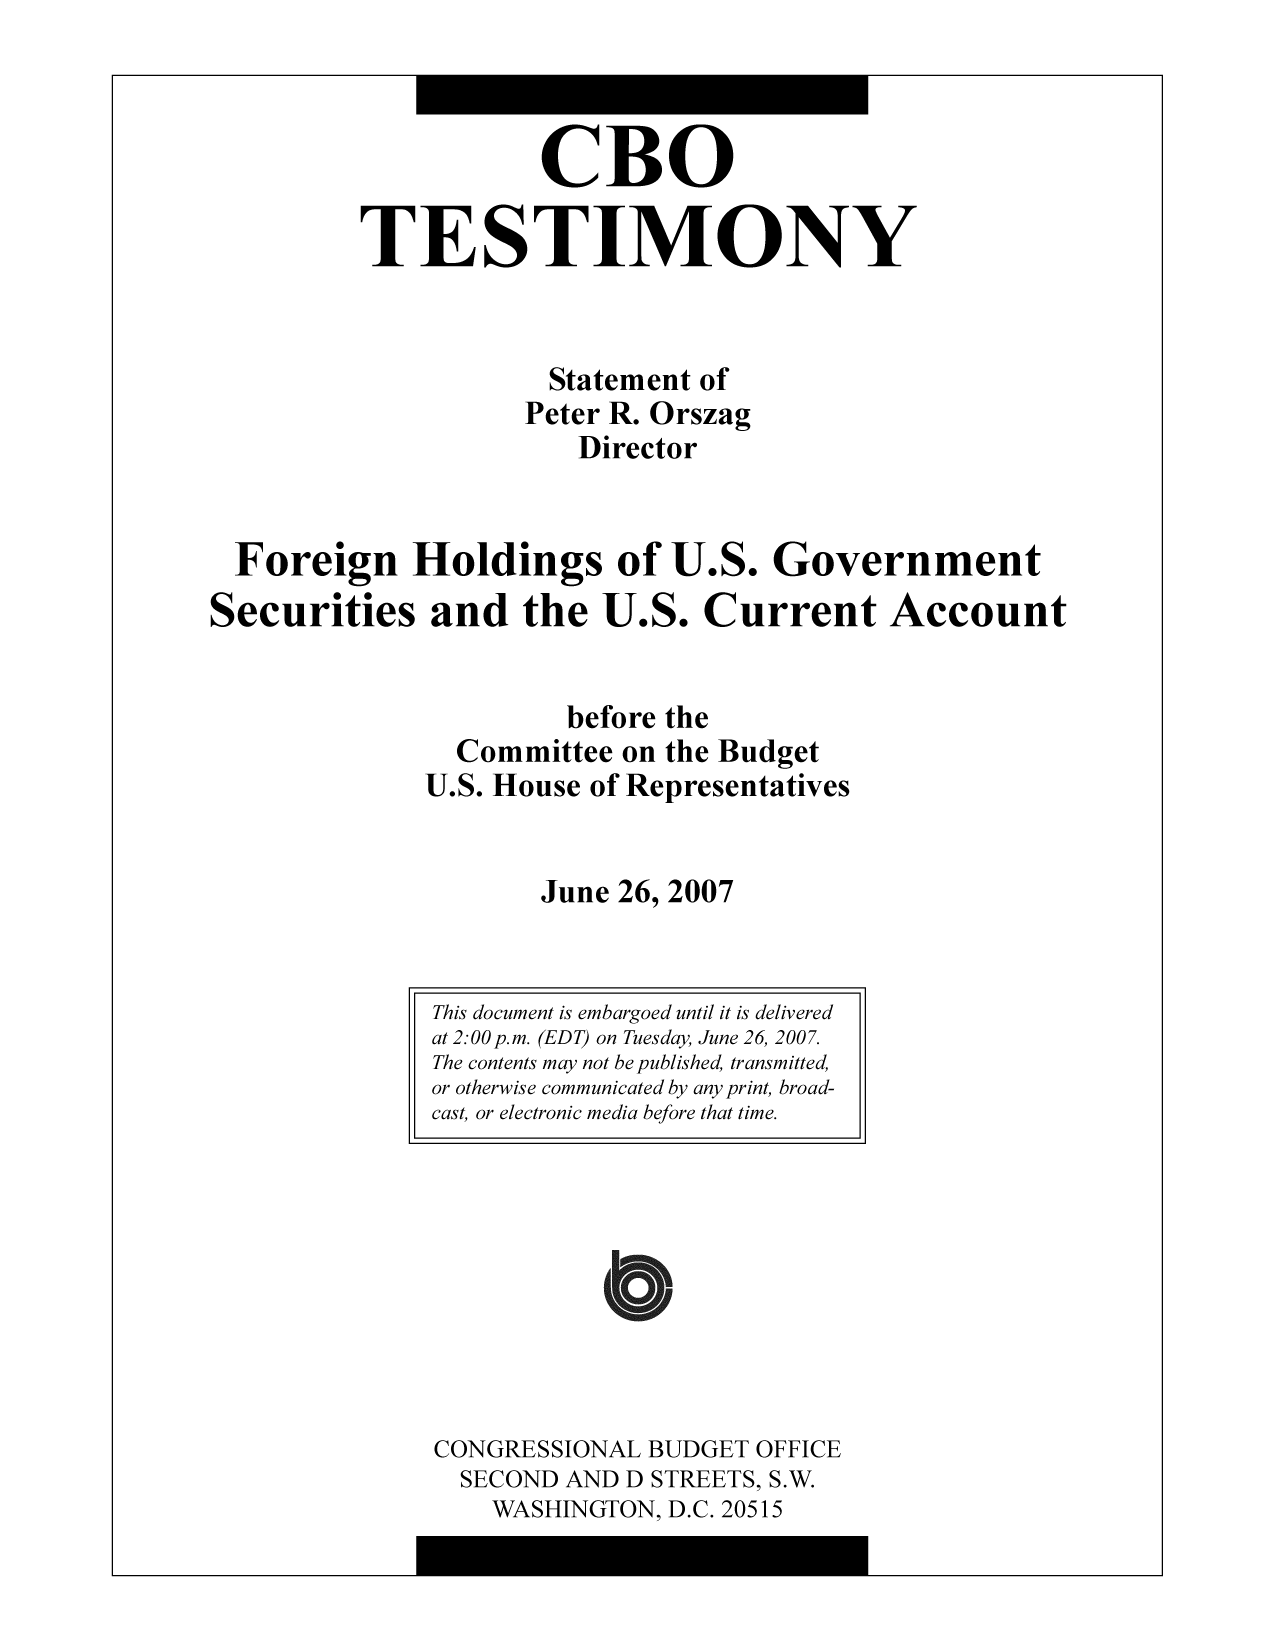 handle is hein.congrec/cbo9574 and id is 1 raw text is: CBO
TESTIMONY
Statement of
Peter R. Orszag
Director
Foreign Holdings of U.S. Government
Securities and the U.S. Current Account
before the
Committee on the Budget
U.S. House of Representatives
June 26, 2007

CONGRESSIONAL BUDGET OFFICE
SECOND AND D STREETS, S.W.
WASHINGTON, D.C. 20515

This document is embargoed until it is delivered
at 2:00 p.m. (EDT) on Tuesday, June 26, 2007.
The contents may not be published, transmitted,
or otherwise communicated by any print, broad-
cast, or electronic media before that time.


